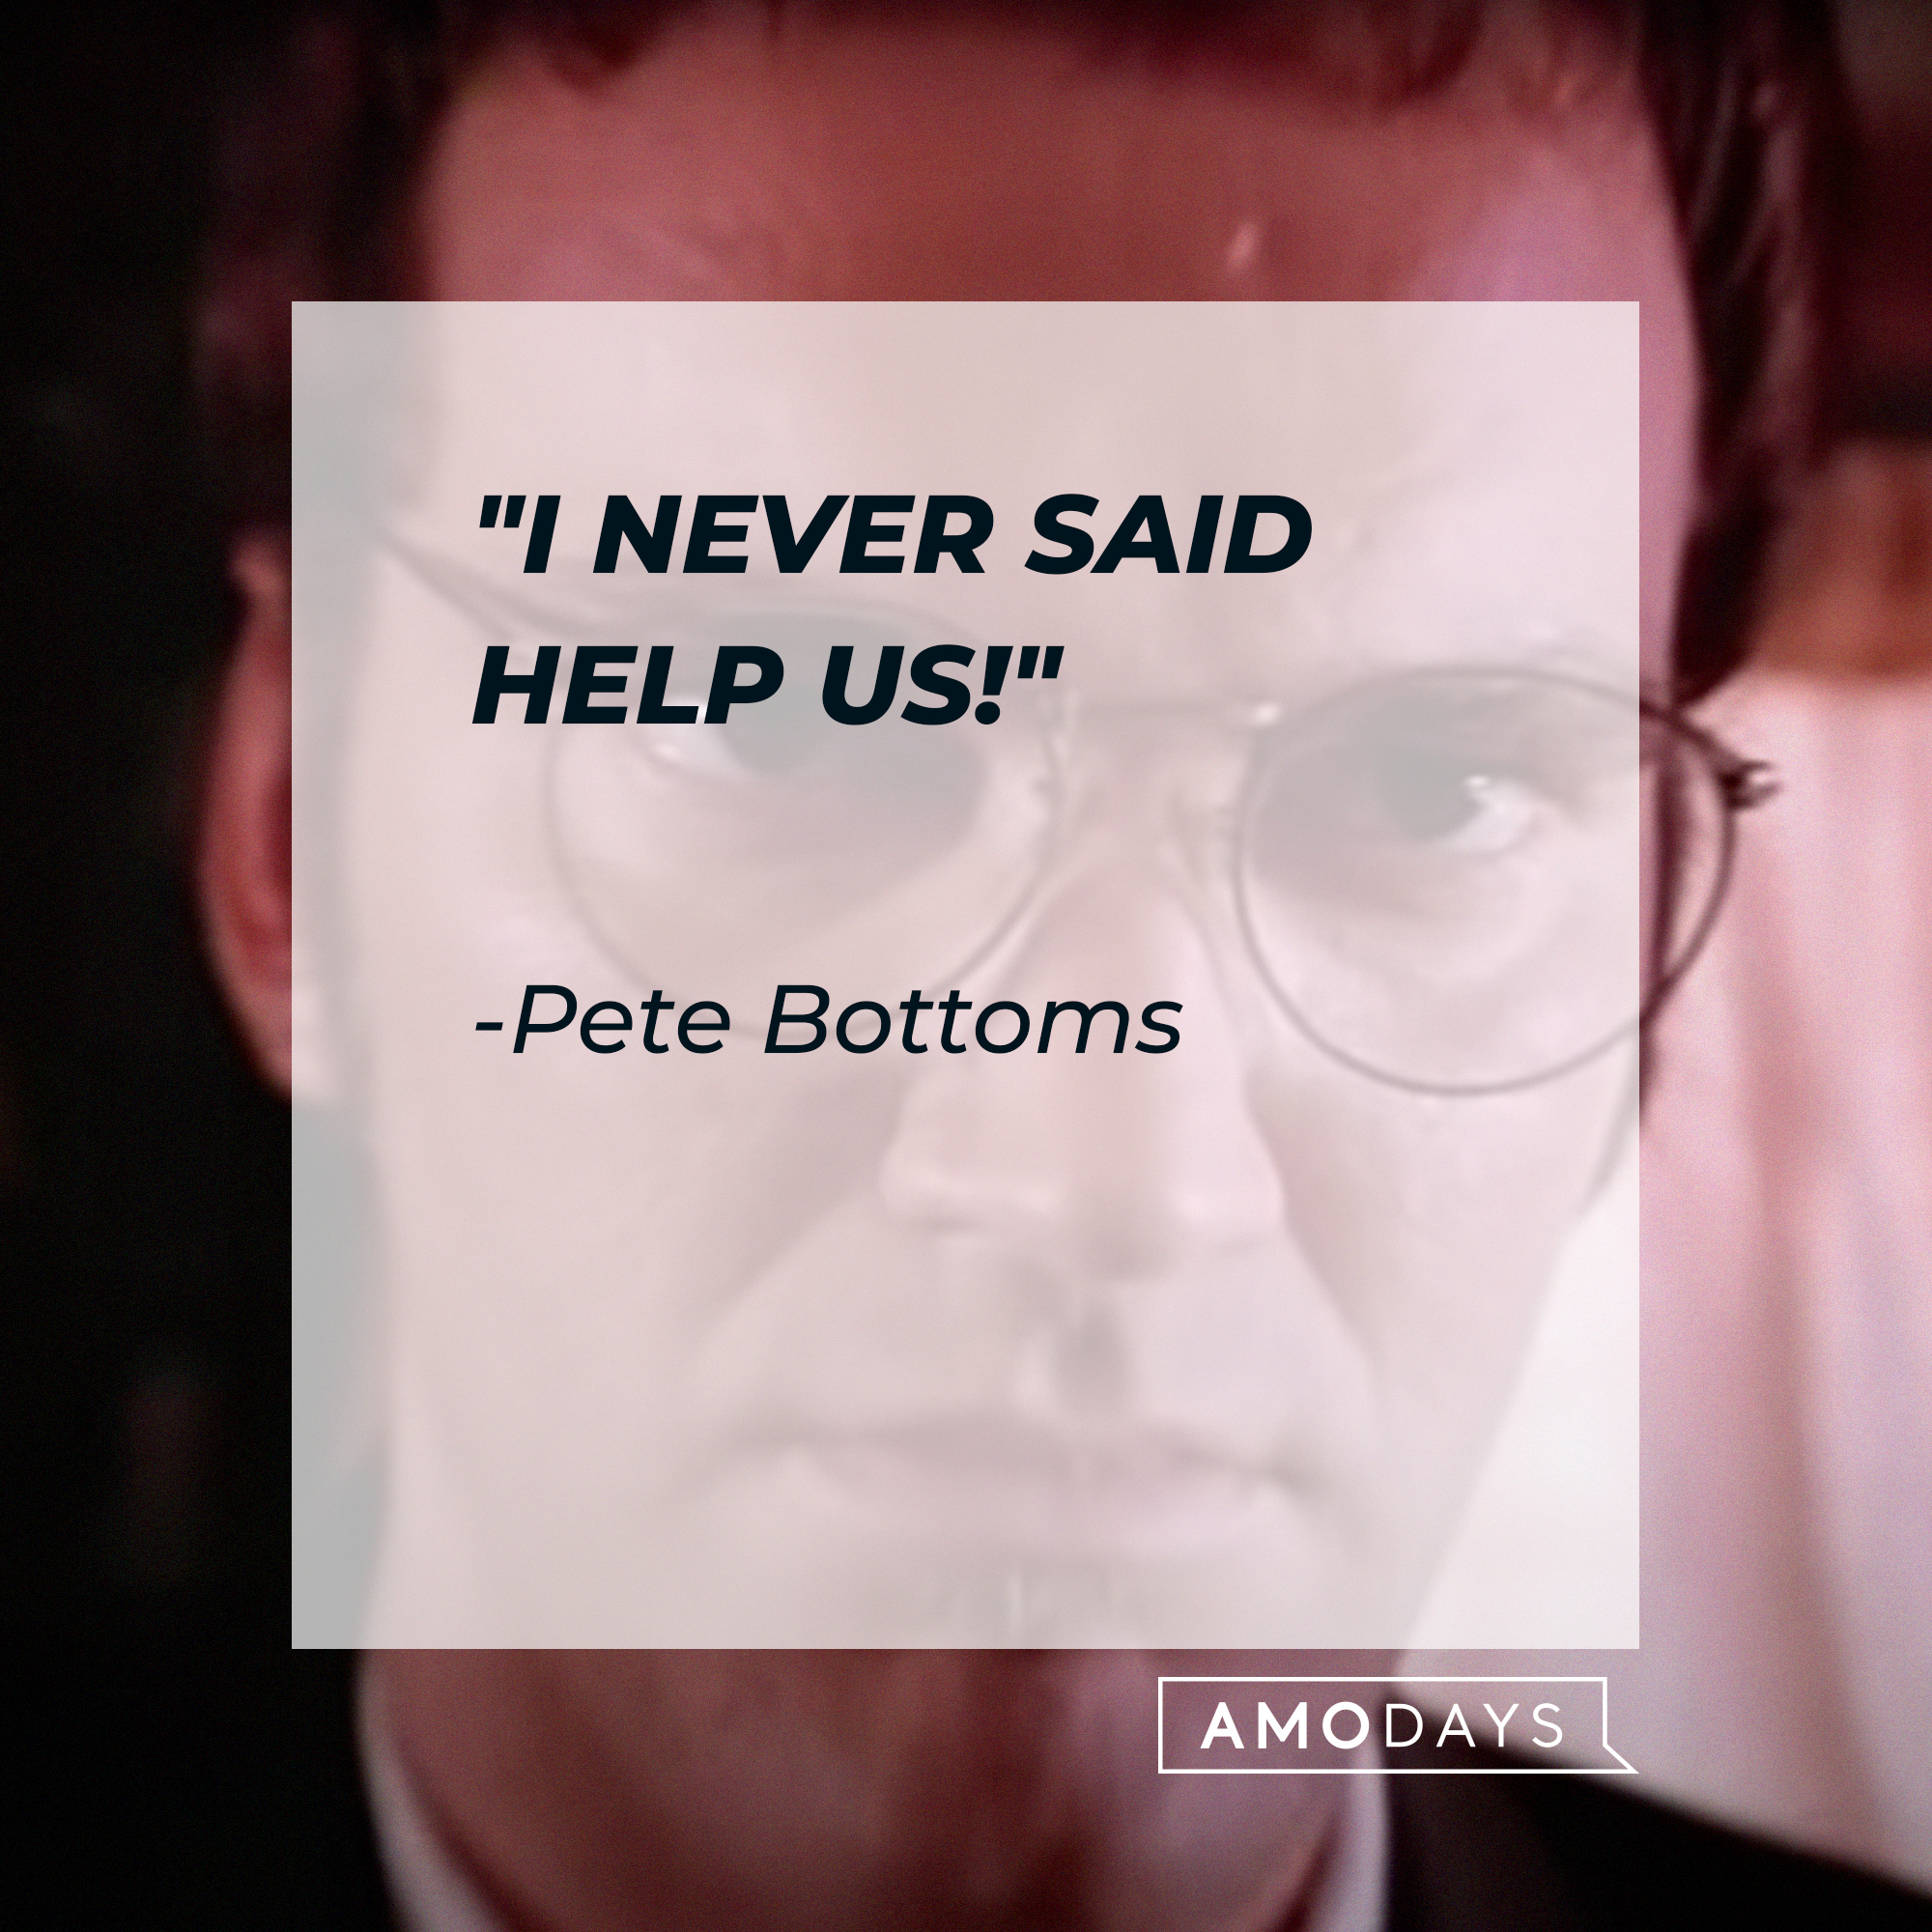 Pete Bottoms' quote: "I NEVER SAID HELP US!" | Source: youtube.com/miramax